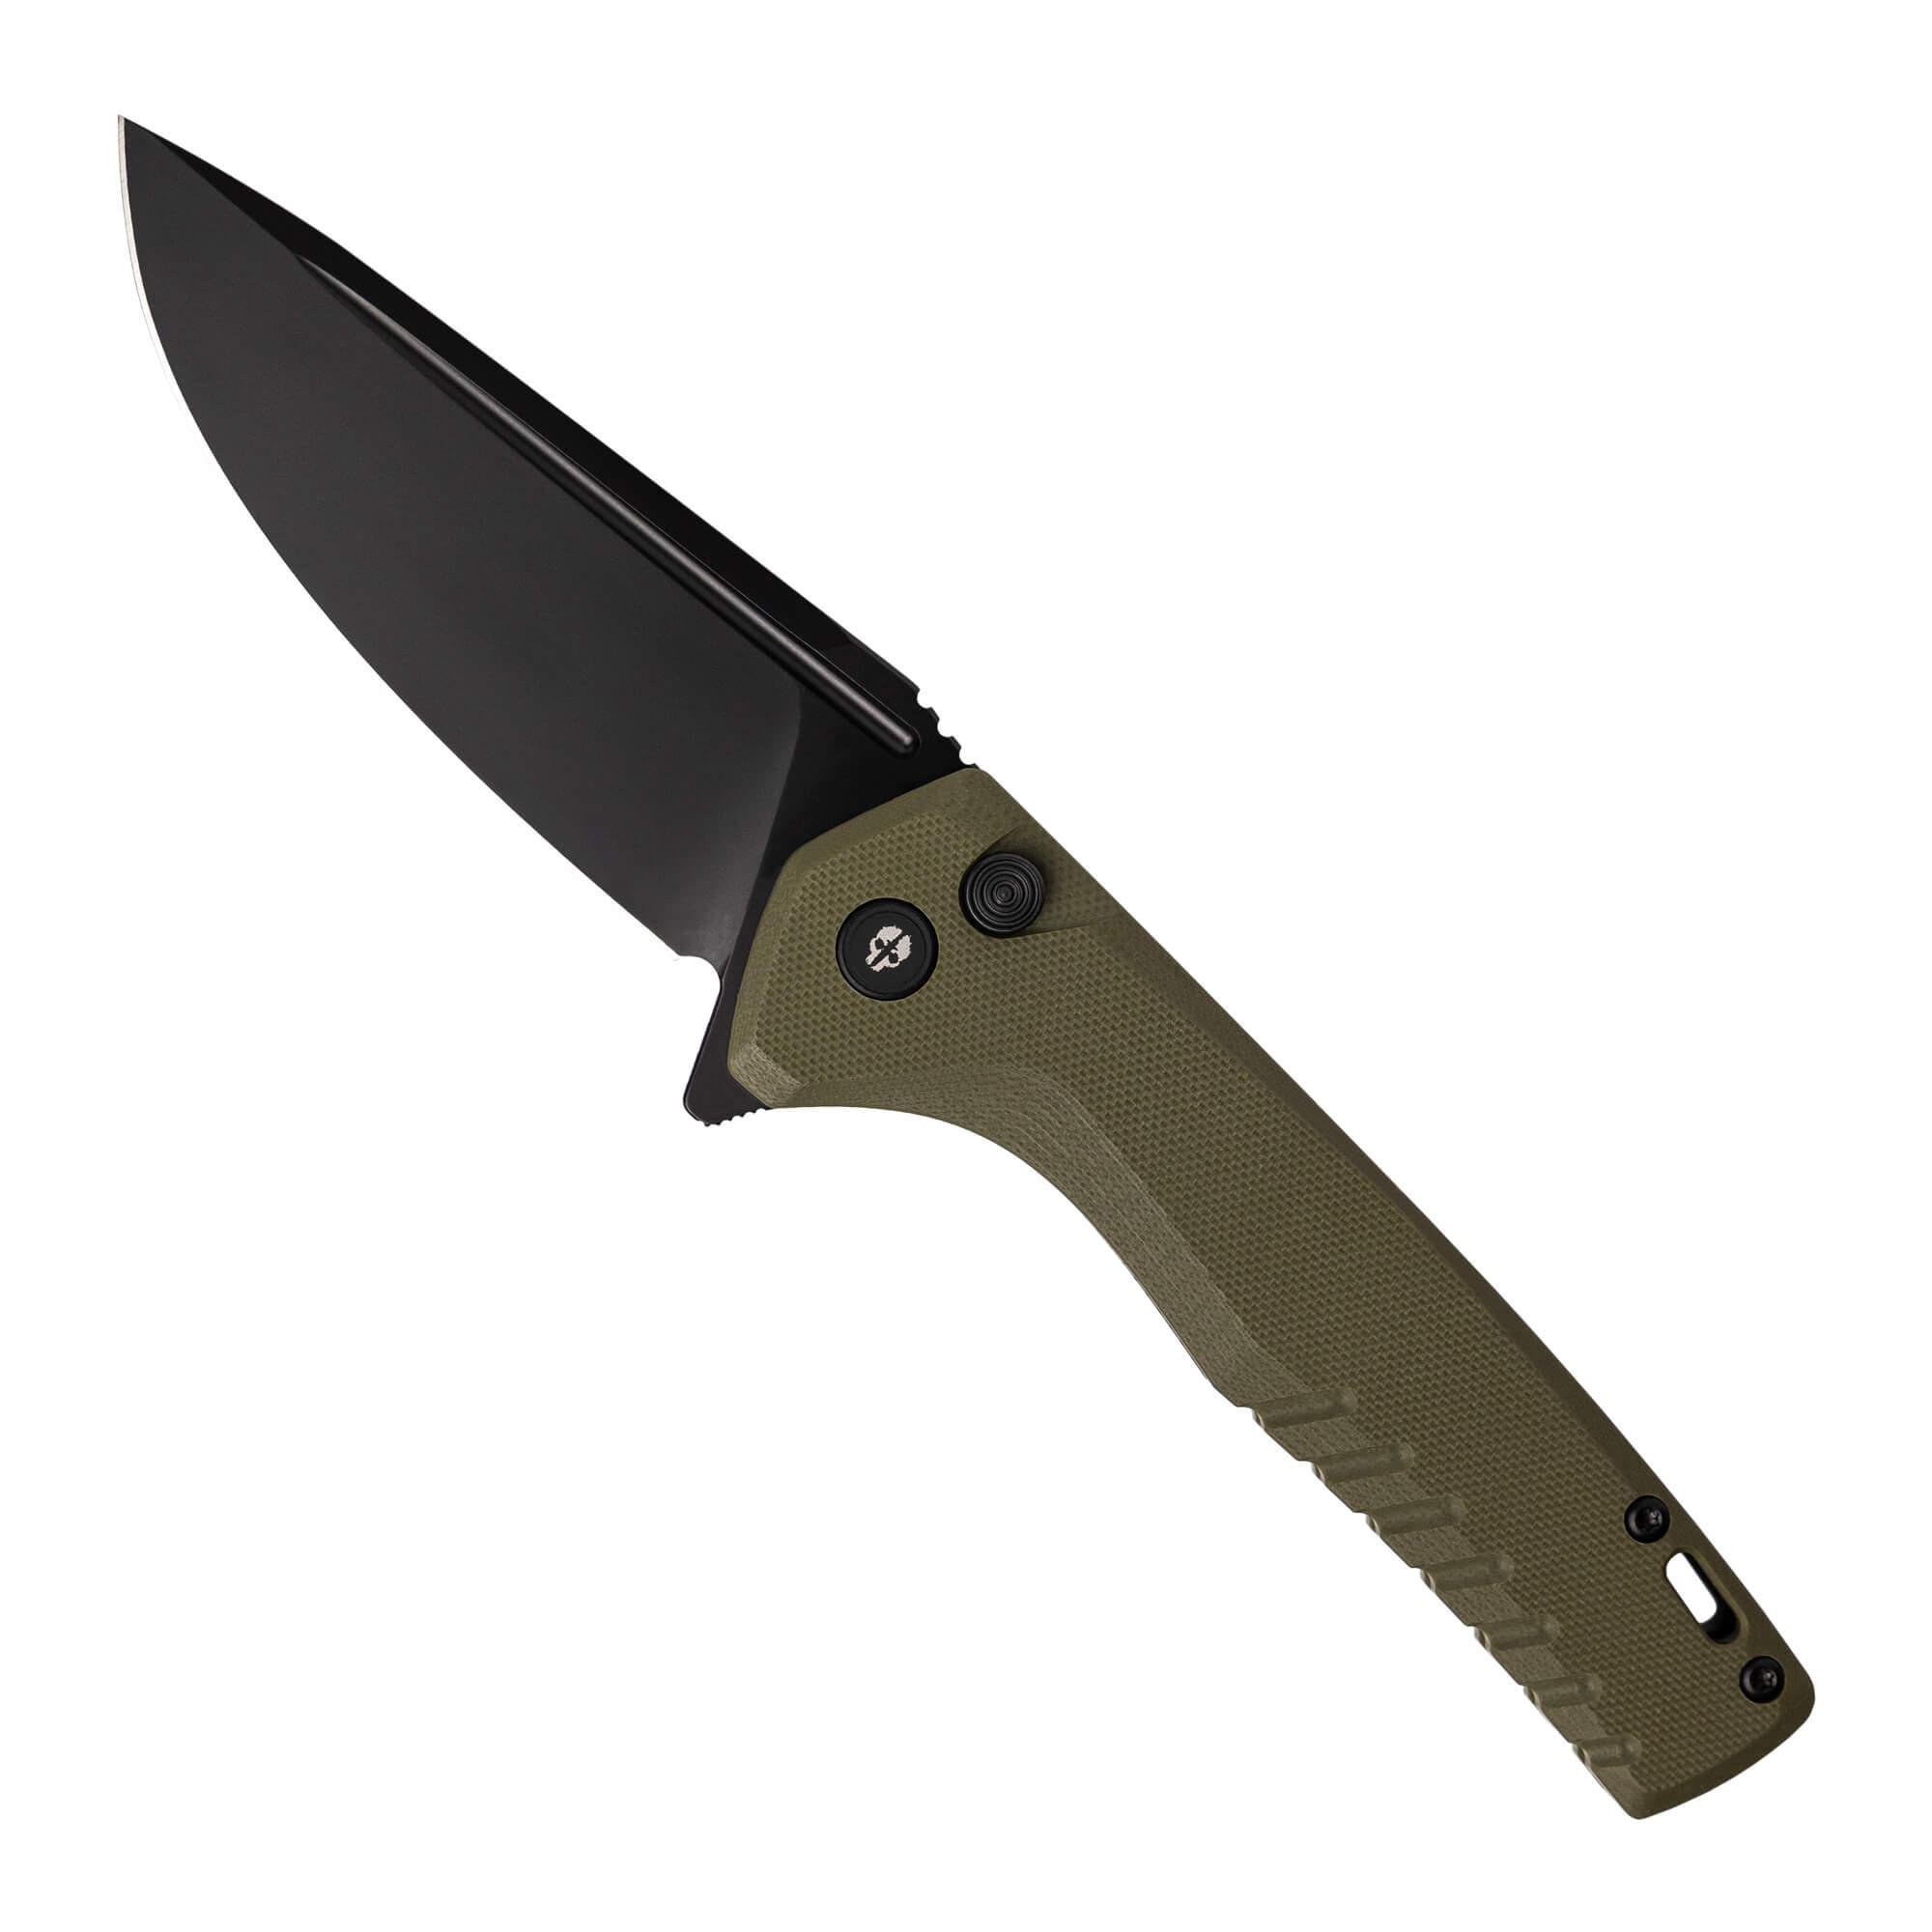 F3 Charlie - OD Green G10 // Black - Purpose-Built / Home of the Trades